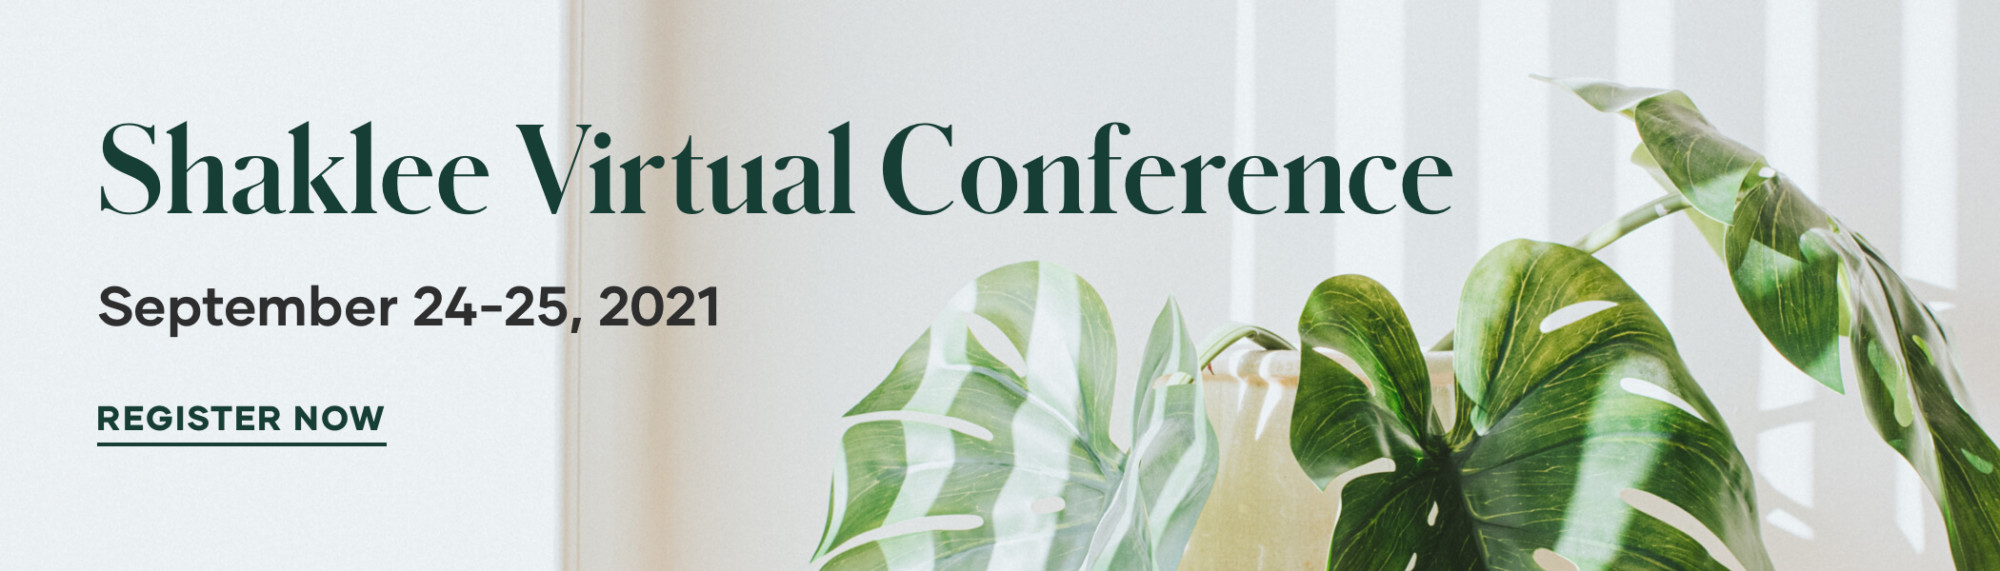 Shaklee Virtual Conference Shaklee News & Events